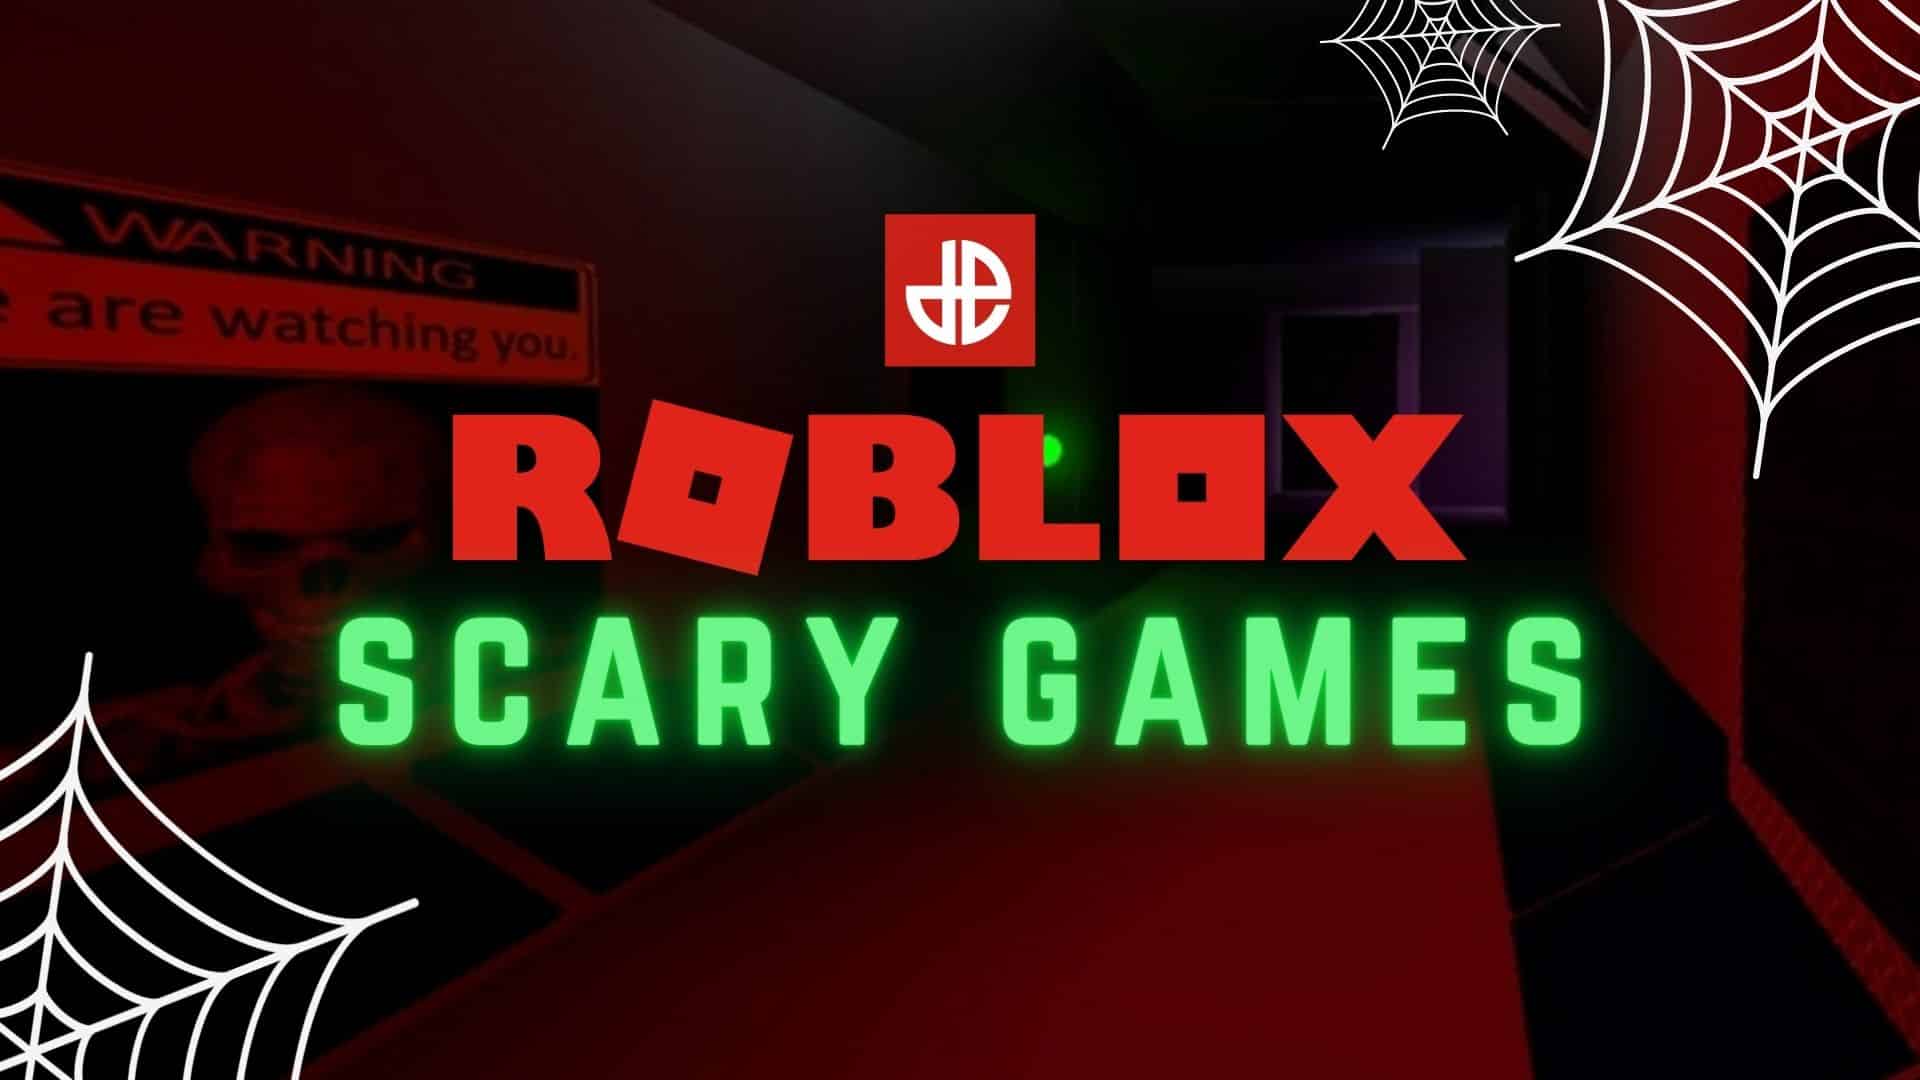 An image of the roblox logo with 'scary games' in text